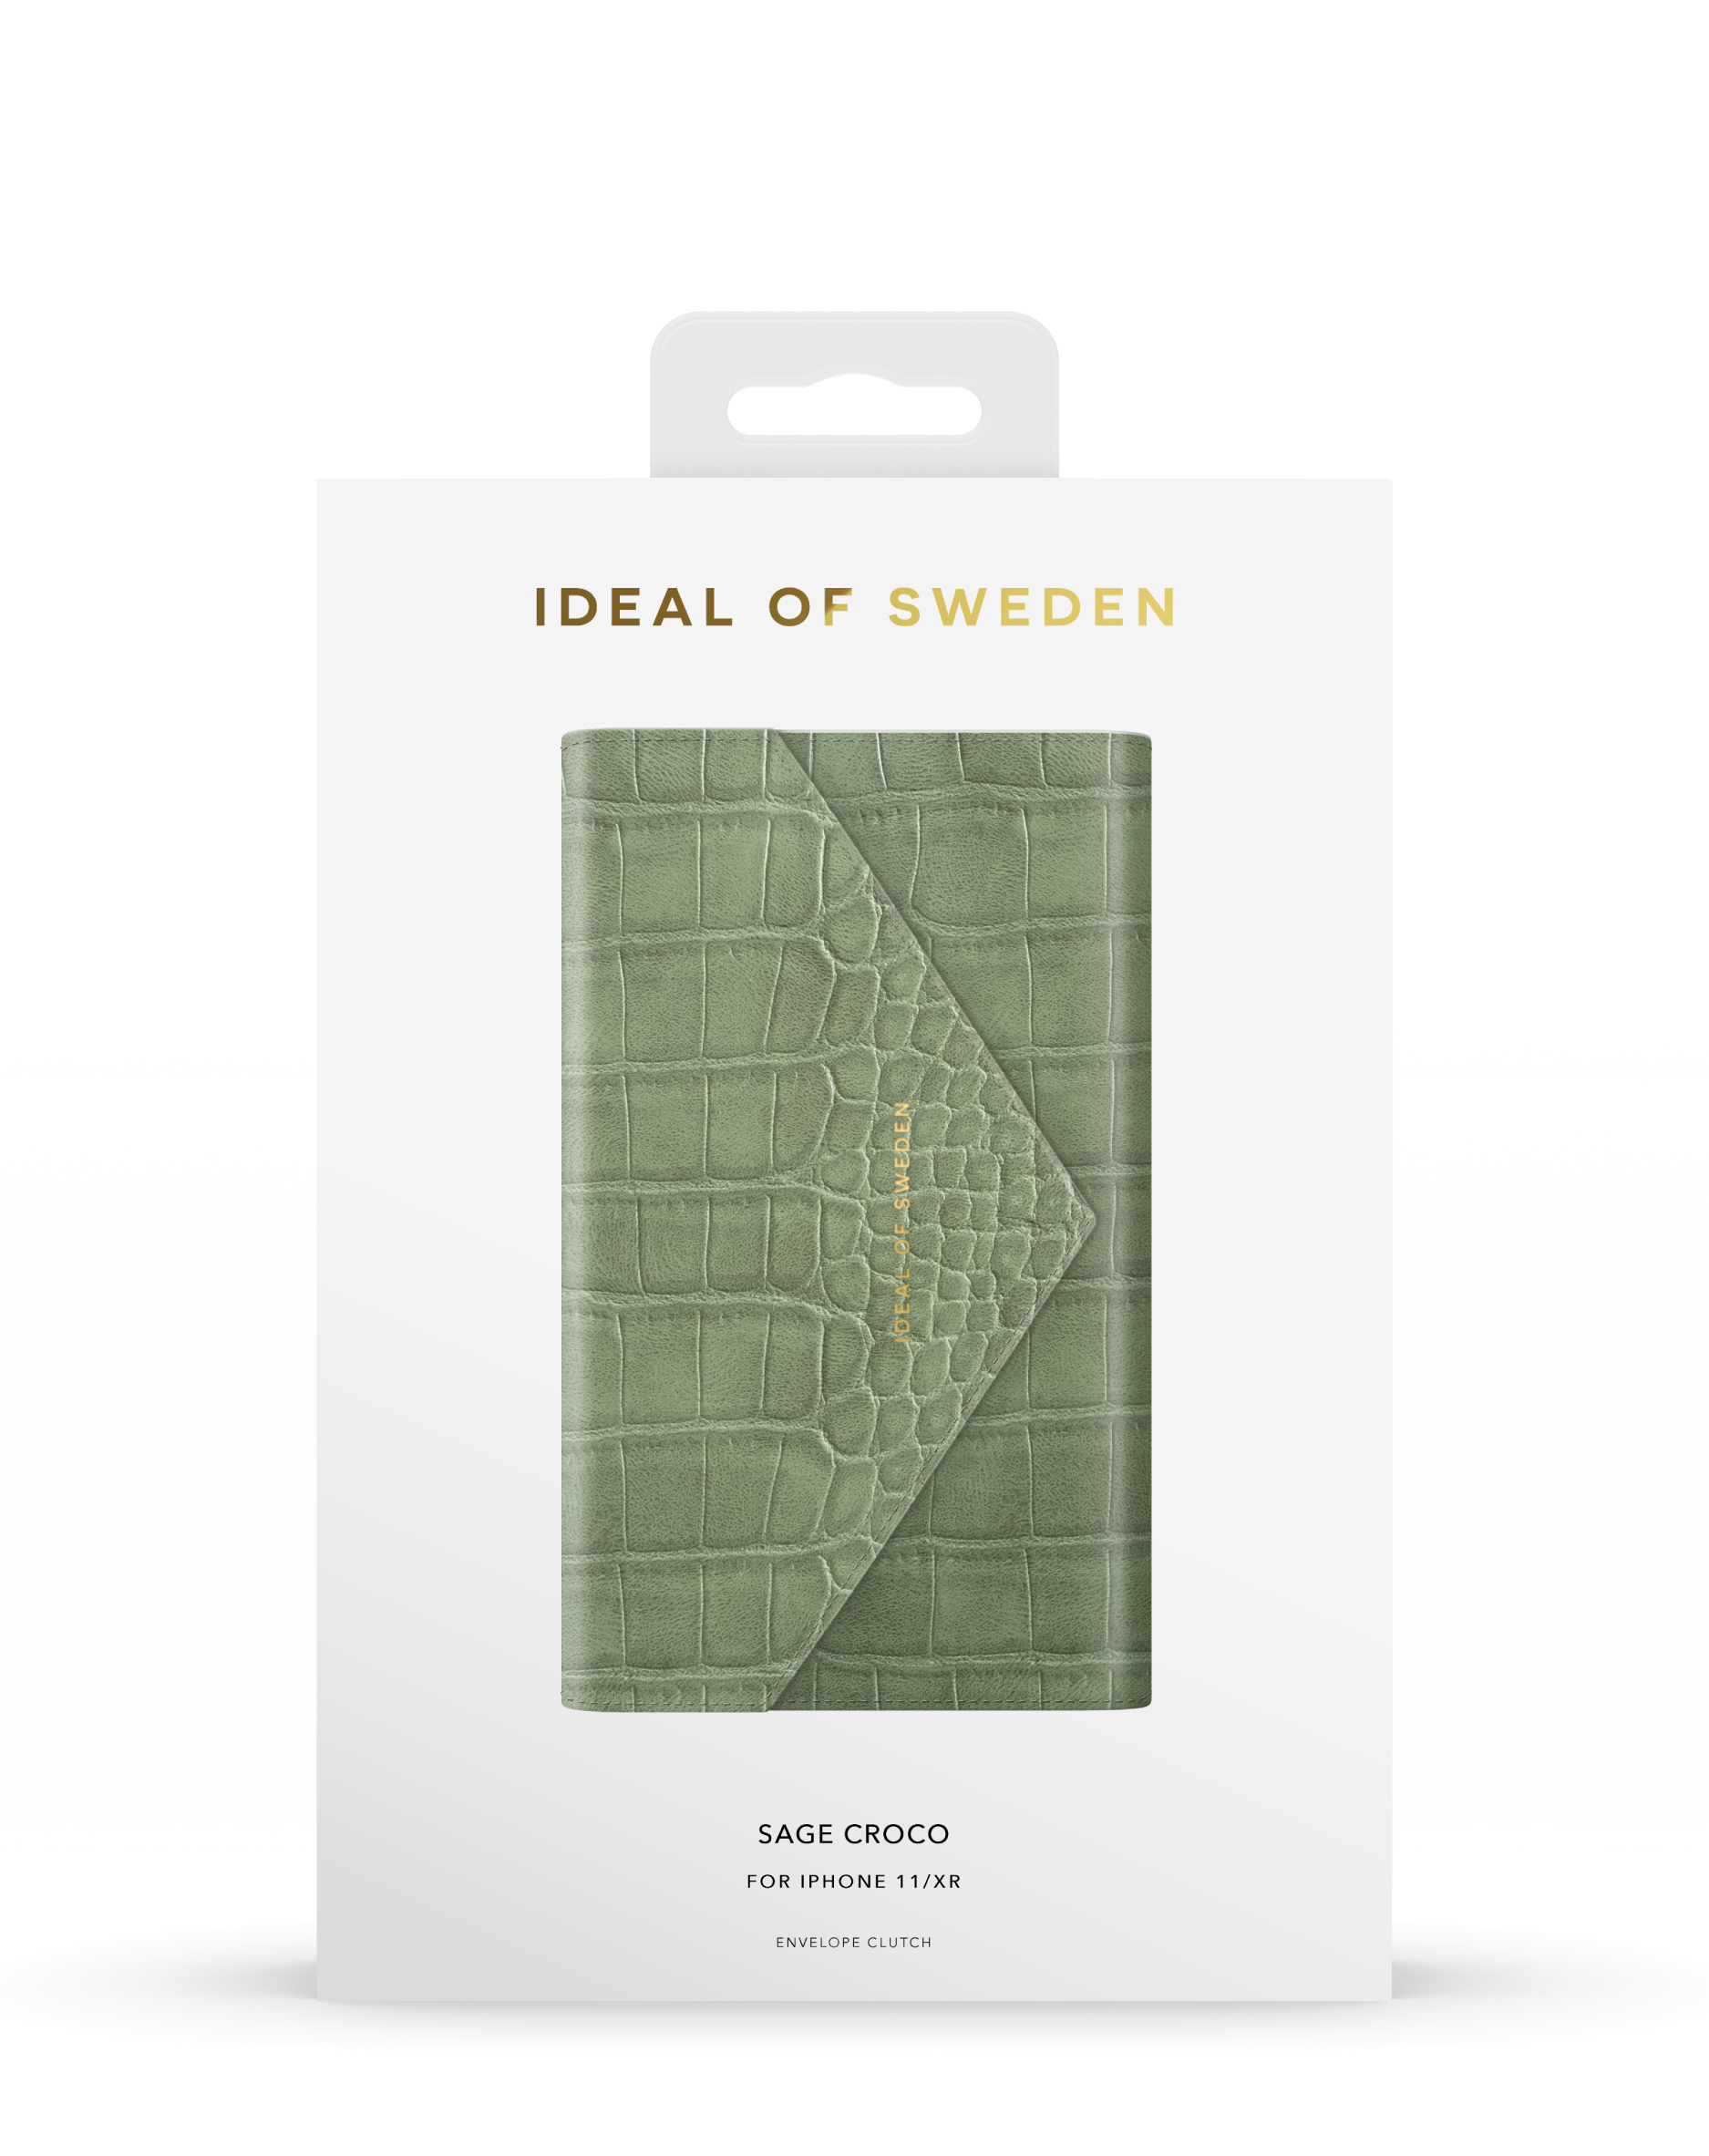 Bookcover, IDECSS20-I1961-210, Croco Sage IDEAL SWEDEN OF 11, Apple, iPhone Apple Apple iPhone XR,